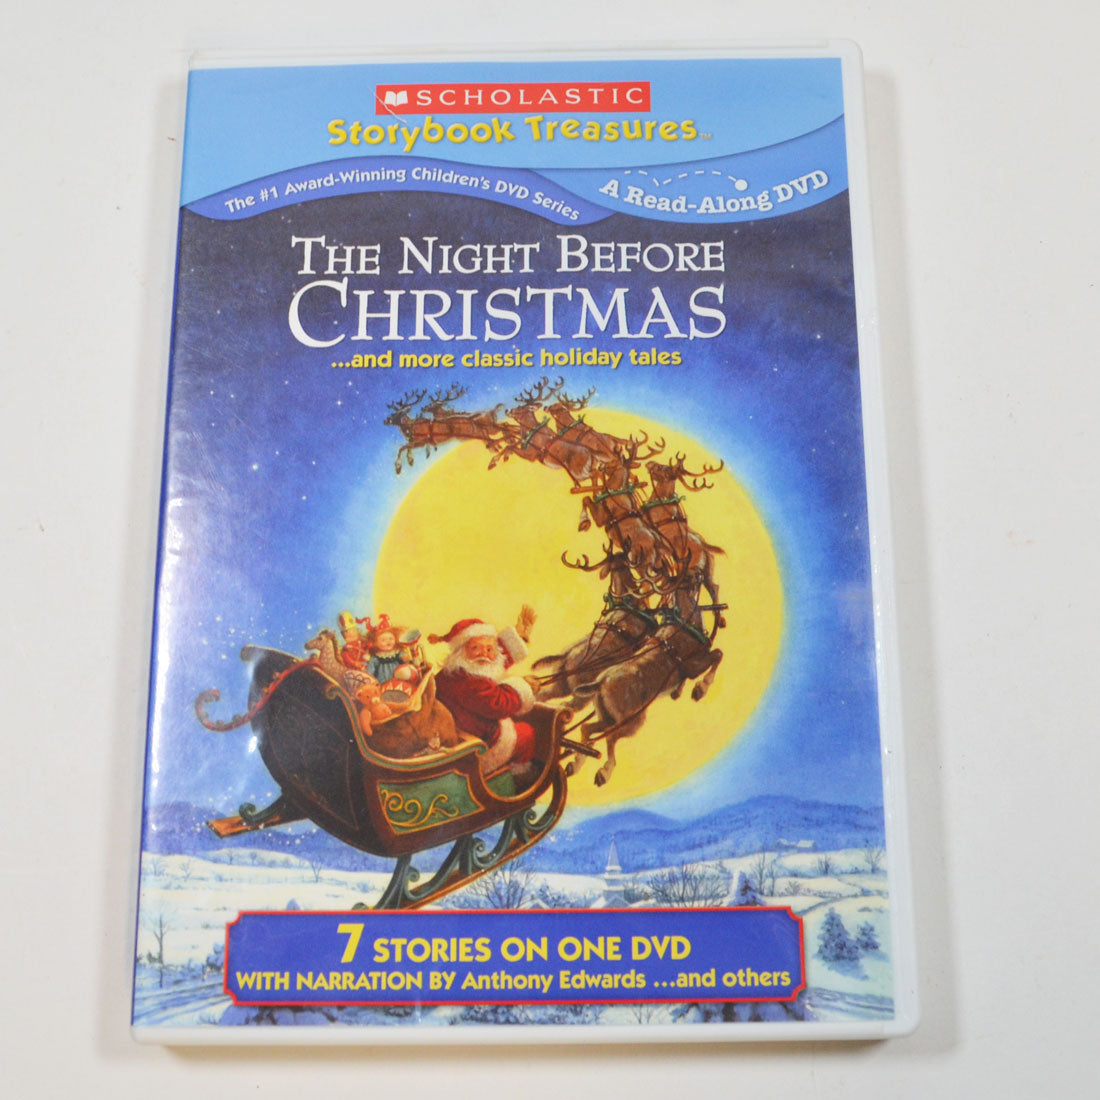 The Night Before Christmas (Read-a-Long DVD, 1997) 7 Stories - Scholastic